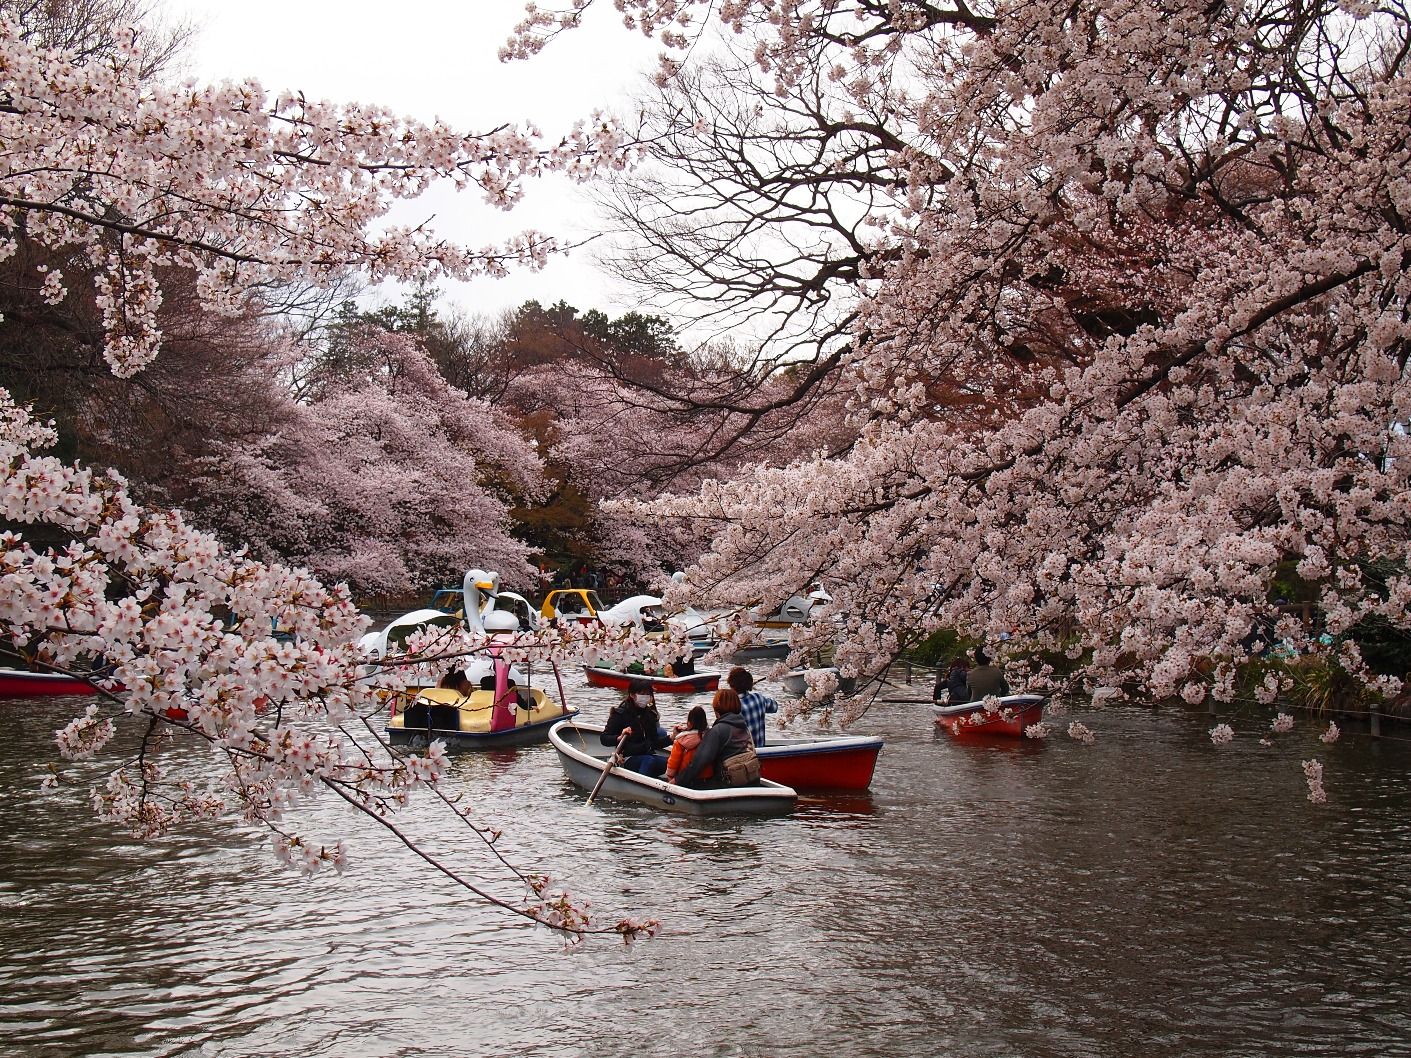 Japan cherry blossom viewing in 2020: best dates & places to see sakura in Japan